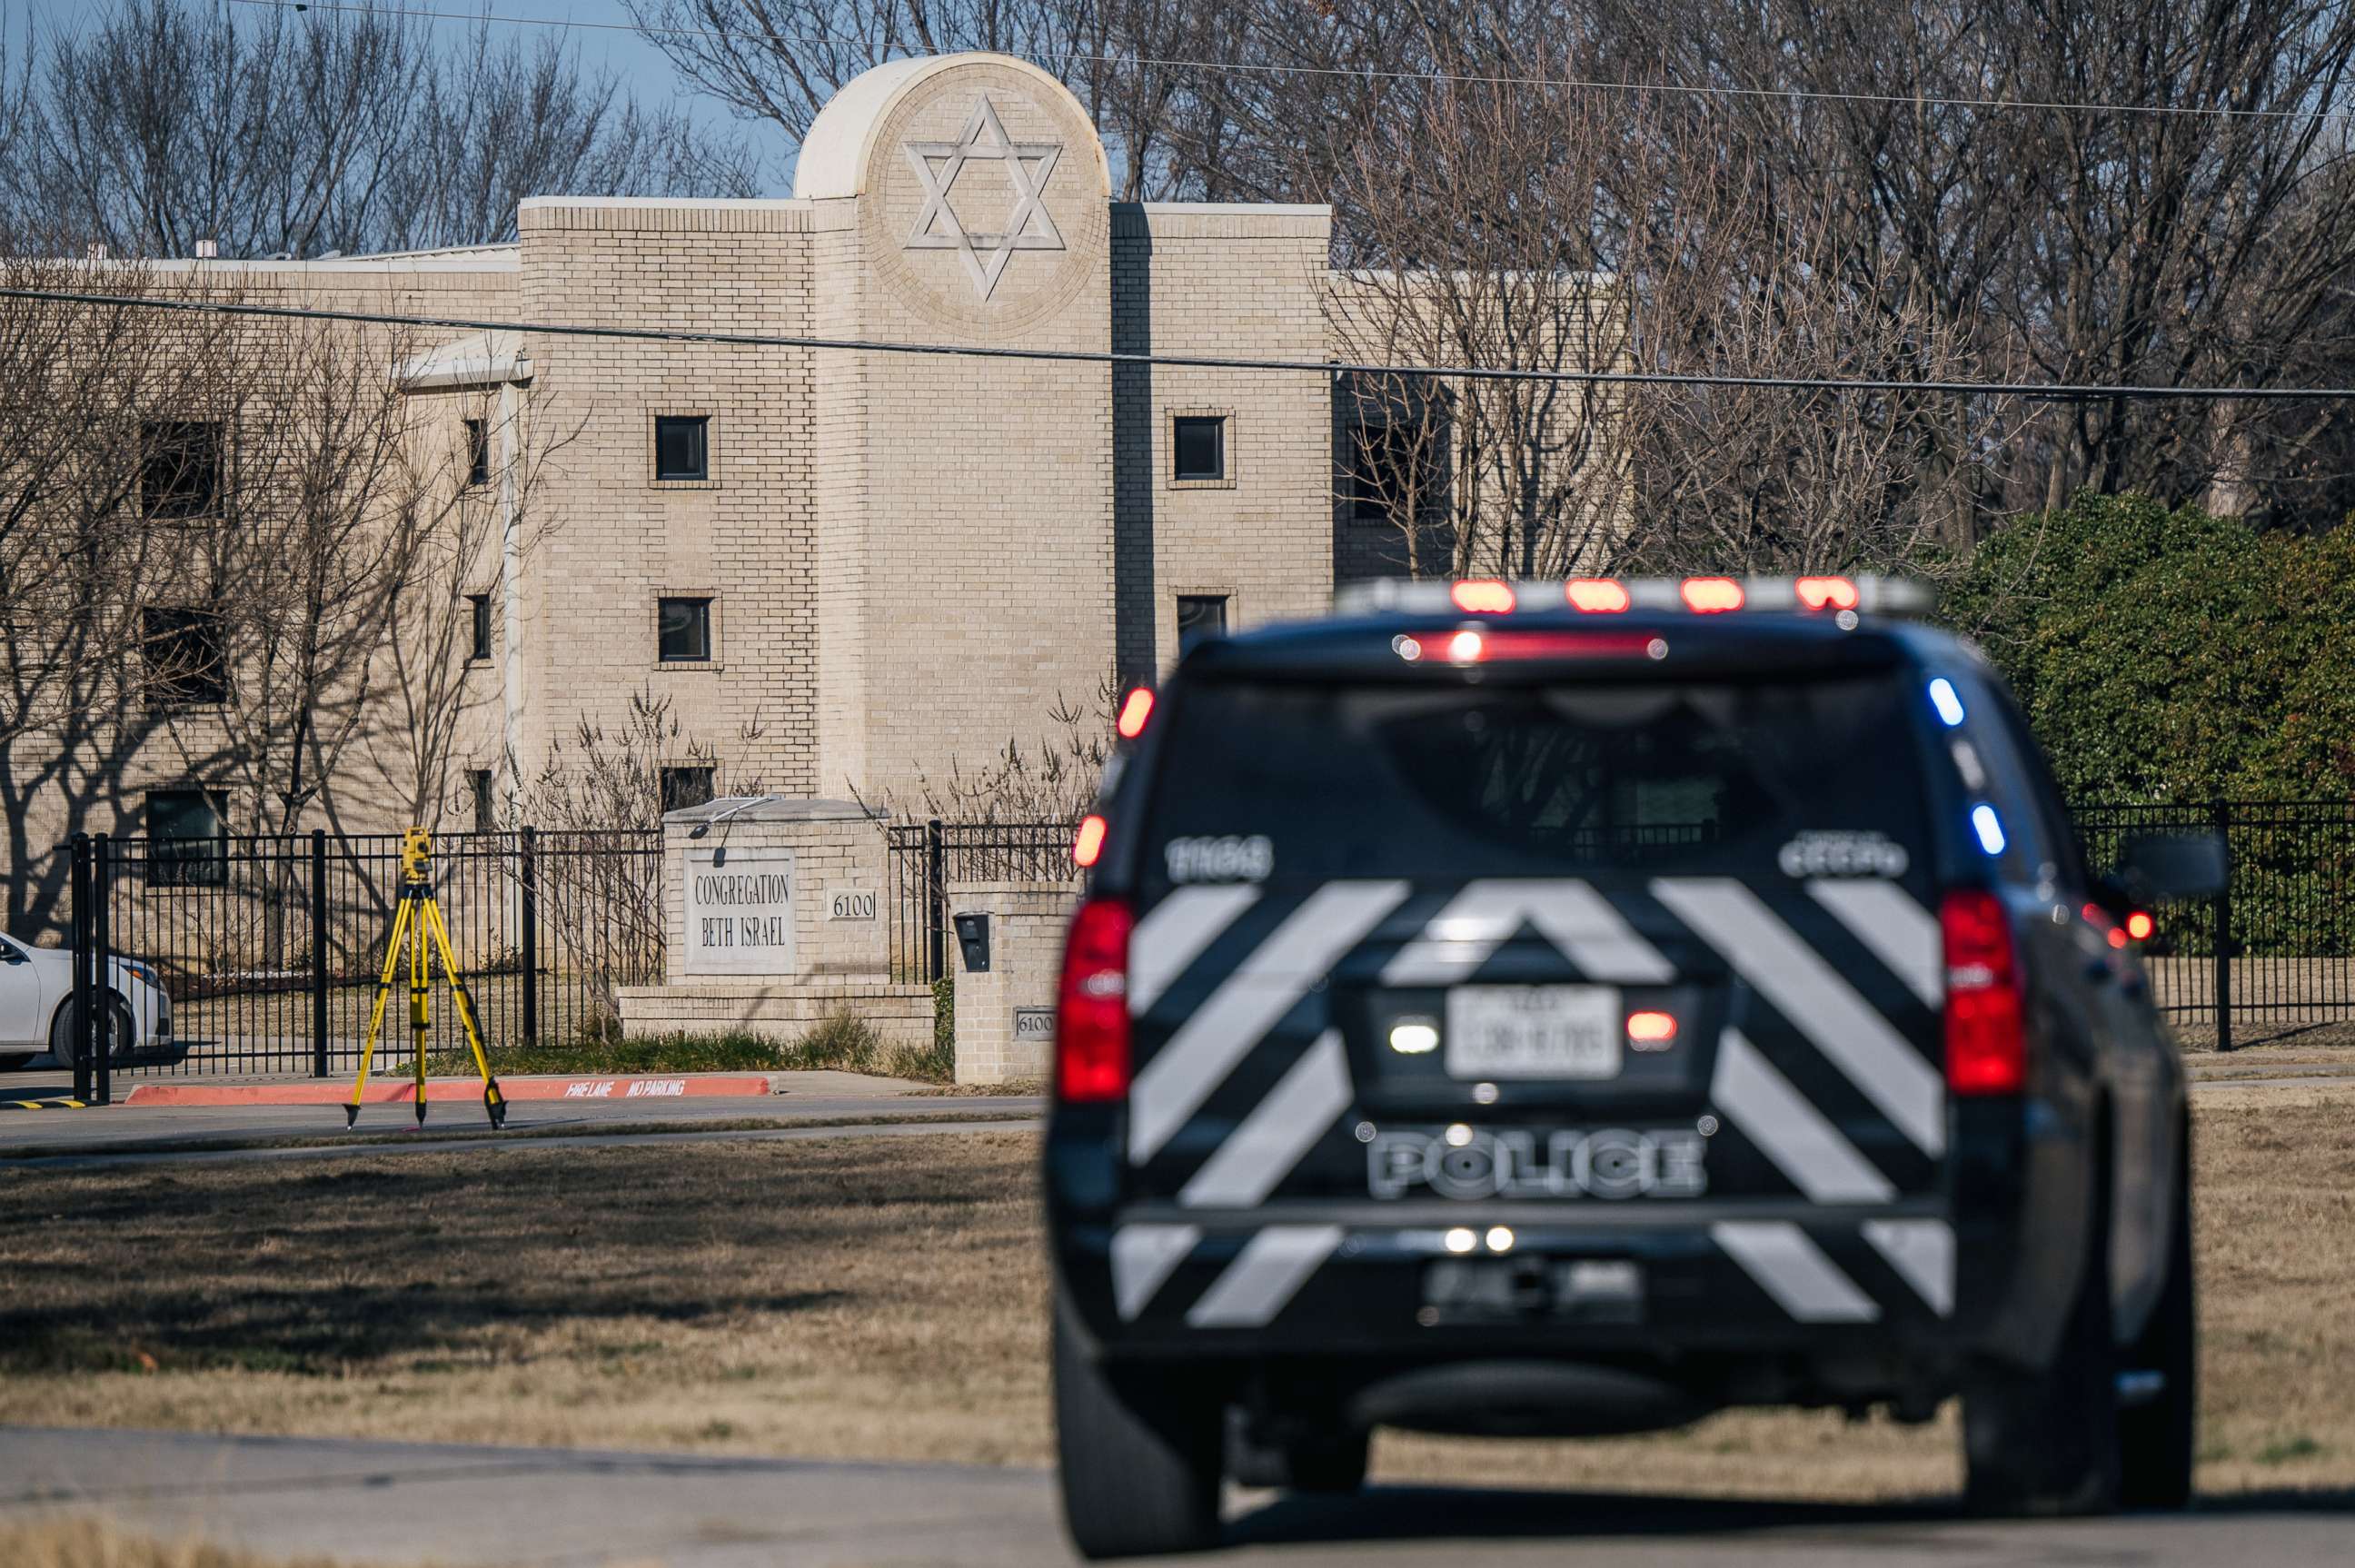 PHOTO: A law enforcement vehicle sits near the Congregation Beth Israel synagogue in Colleyville, Texas, on Jan. 16, 2022, where a gunman held four people hostage for more than 10 hours.